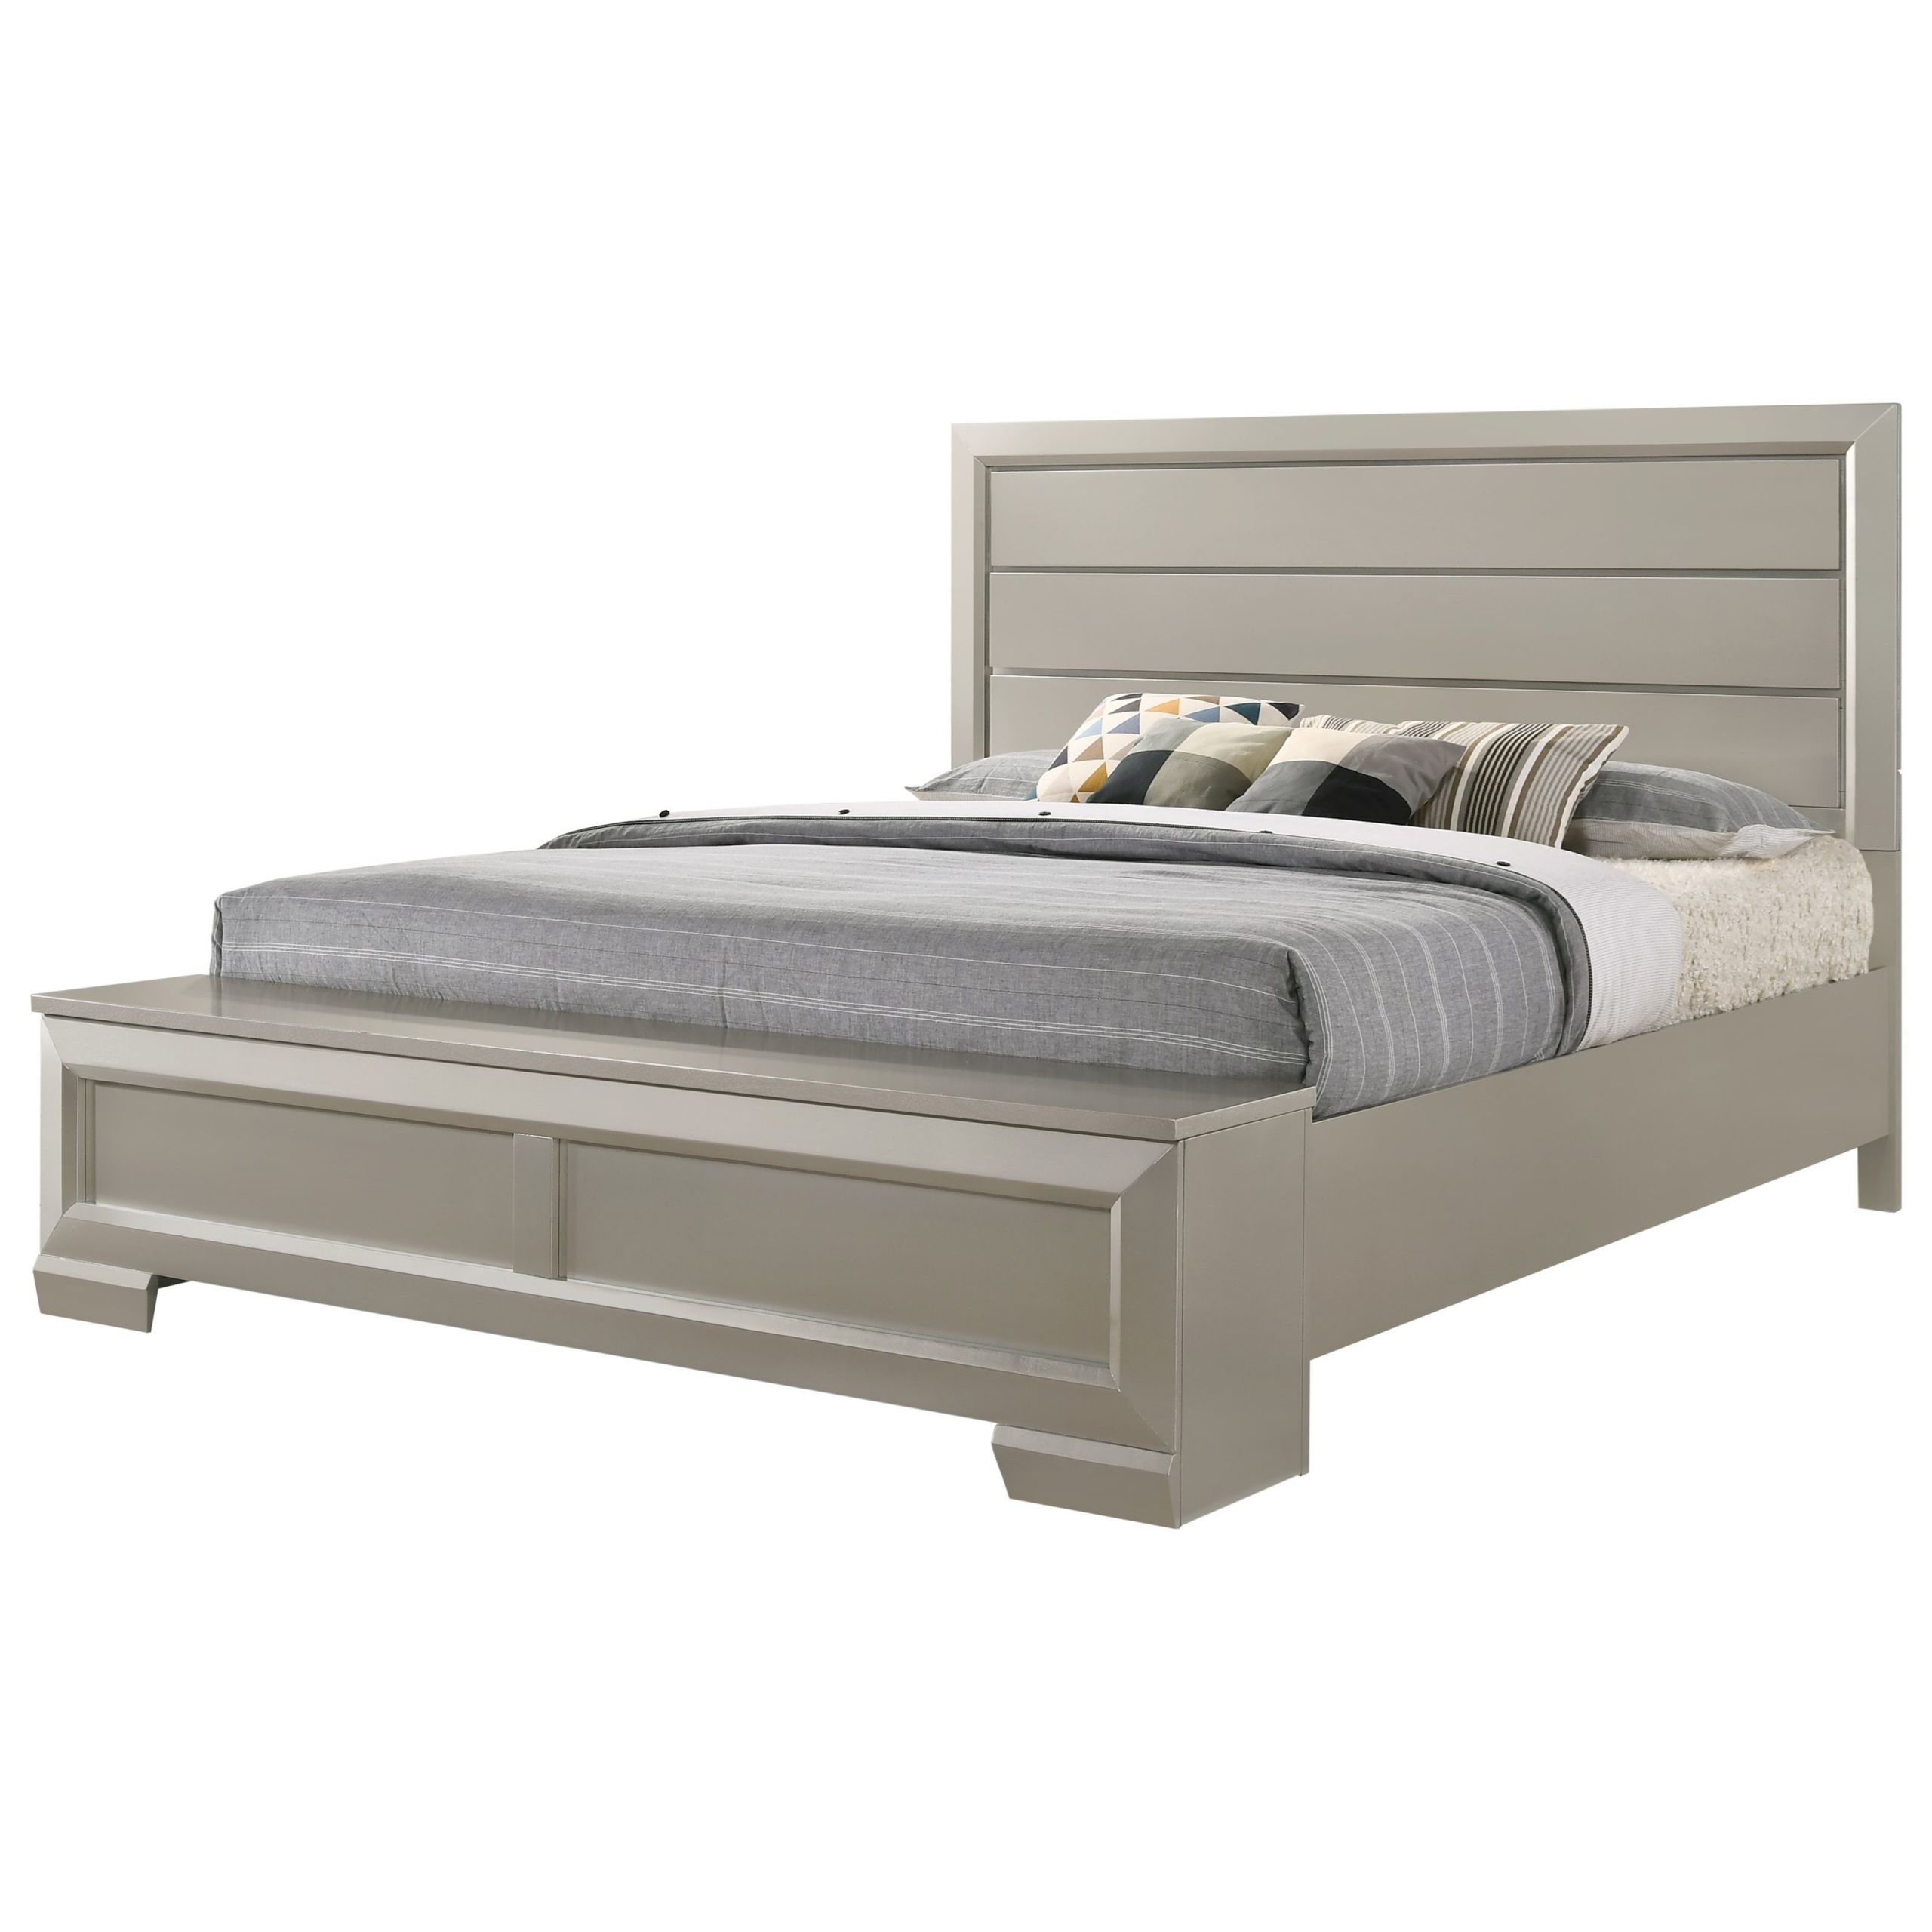 King Size Bed Storage Bench
 Crown Mark Furniture Paloma Contemporary King Storage Bed